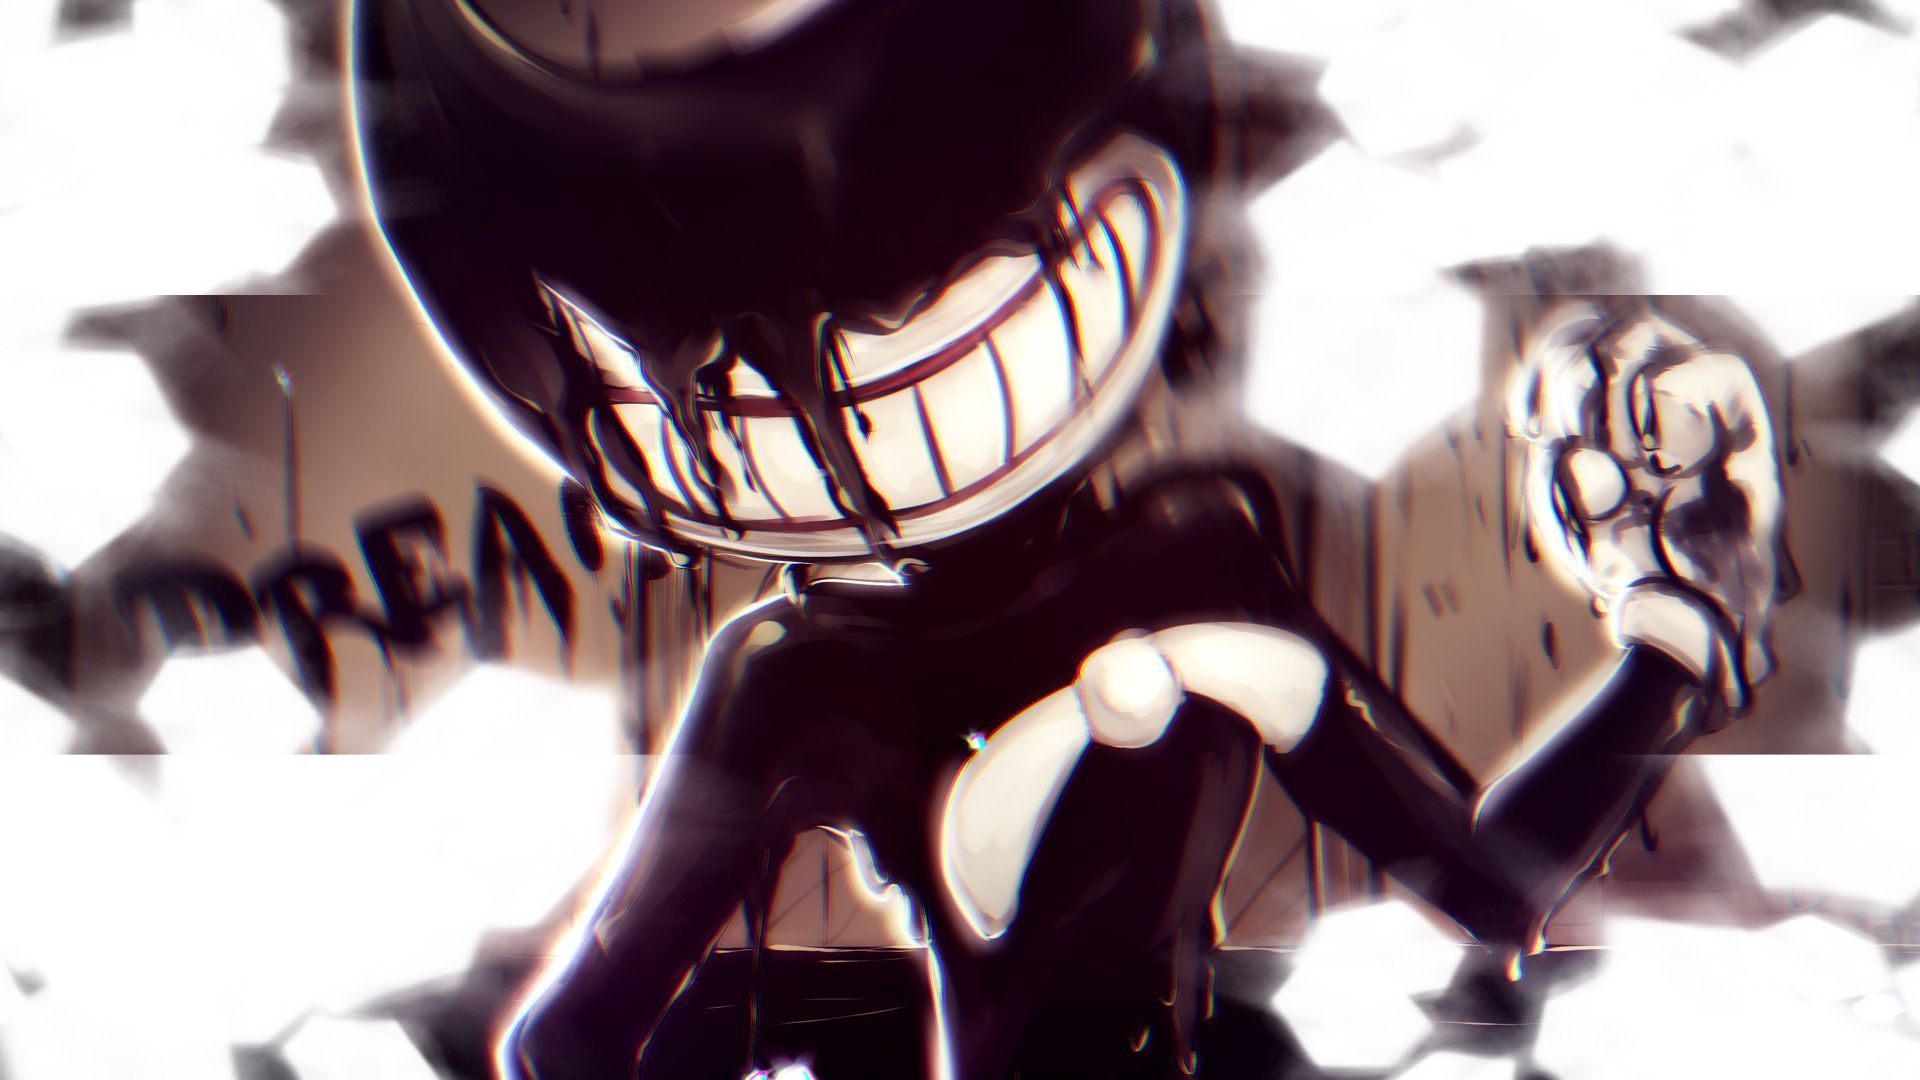 Download this Bendy the Ink Demon Wallpaper!. Bendy and the ink machine, Ink, Fan art